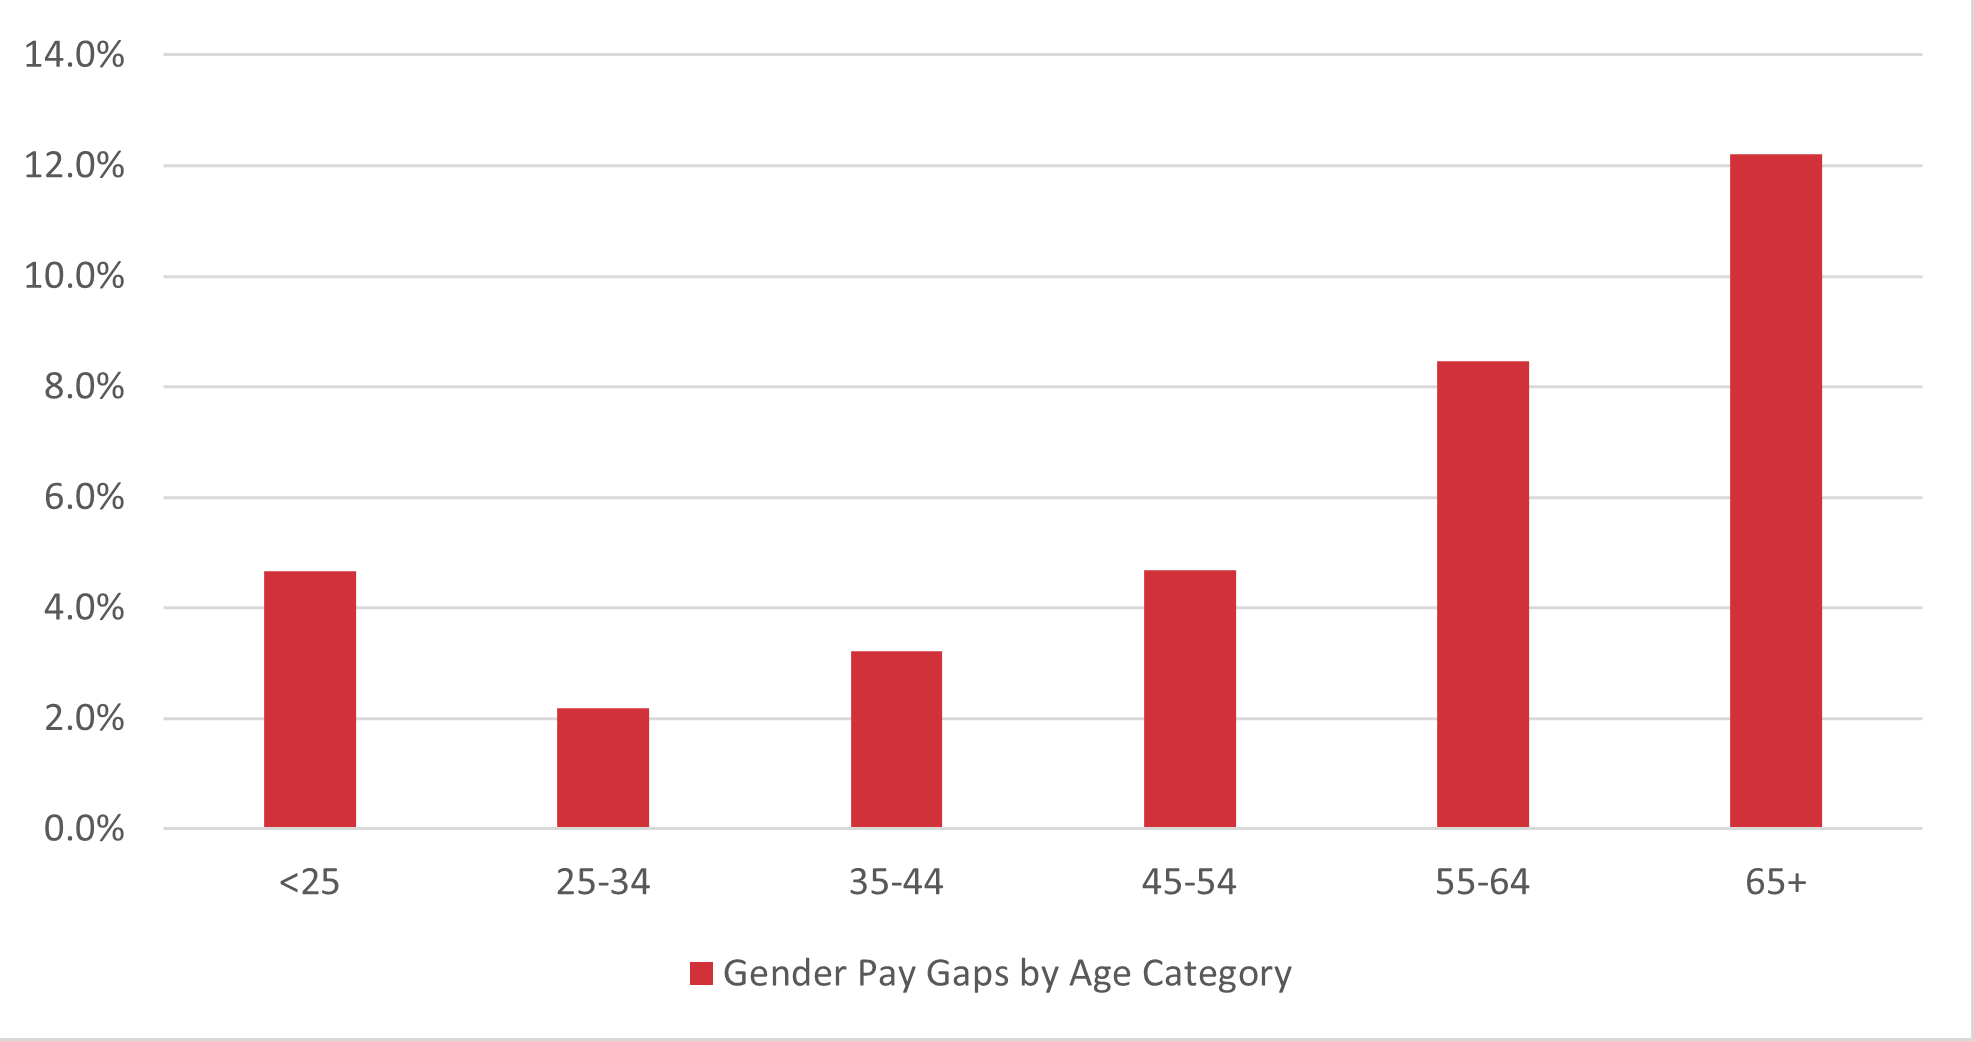 Gender Pay Gaps by Age Category bar graph. Full text description in the table 3a.